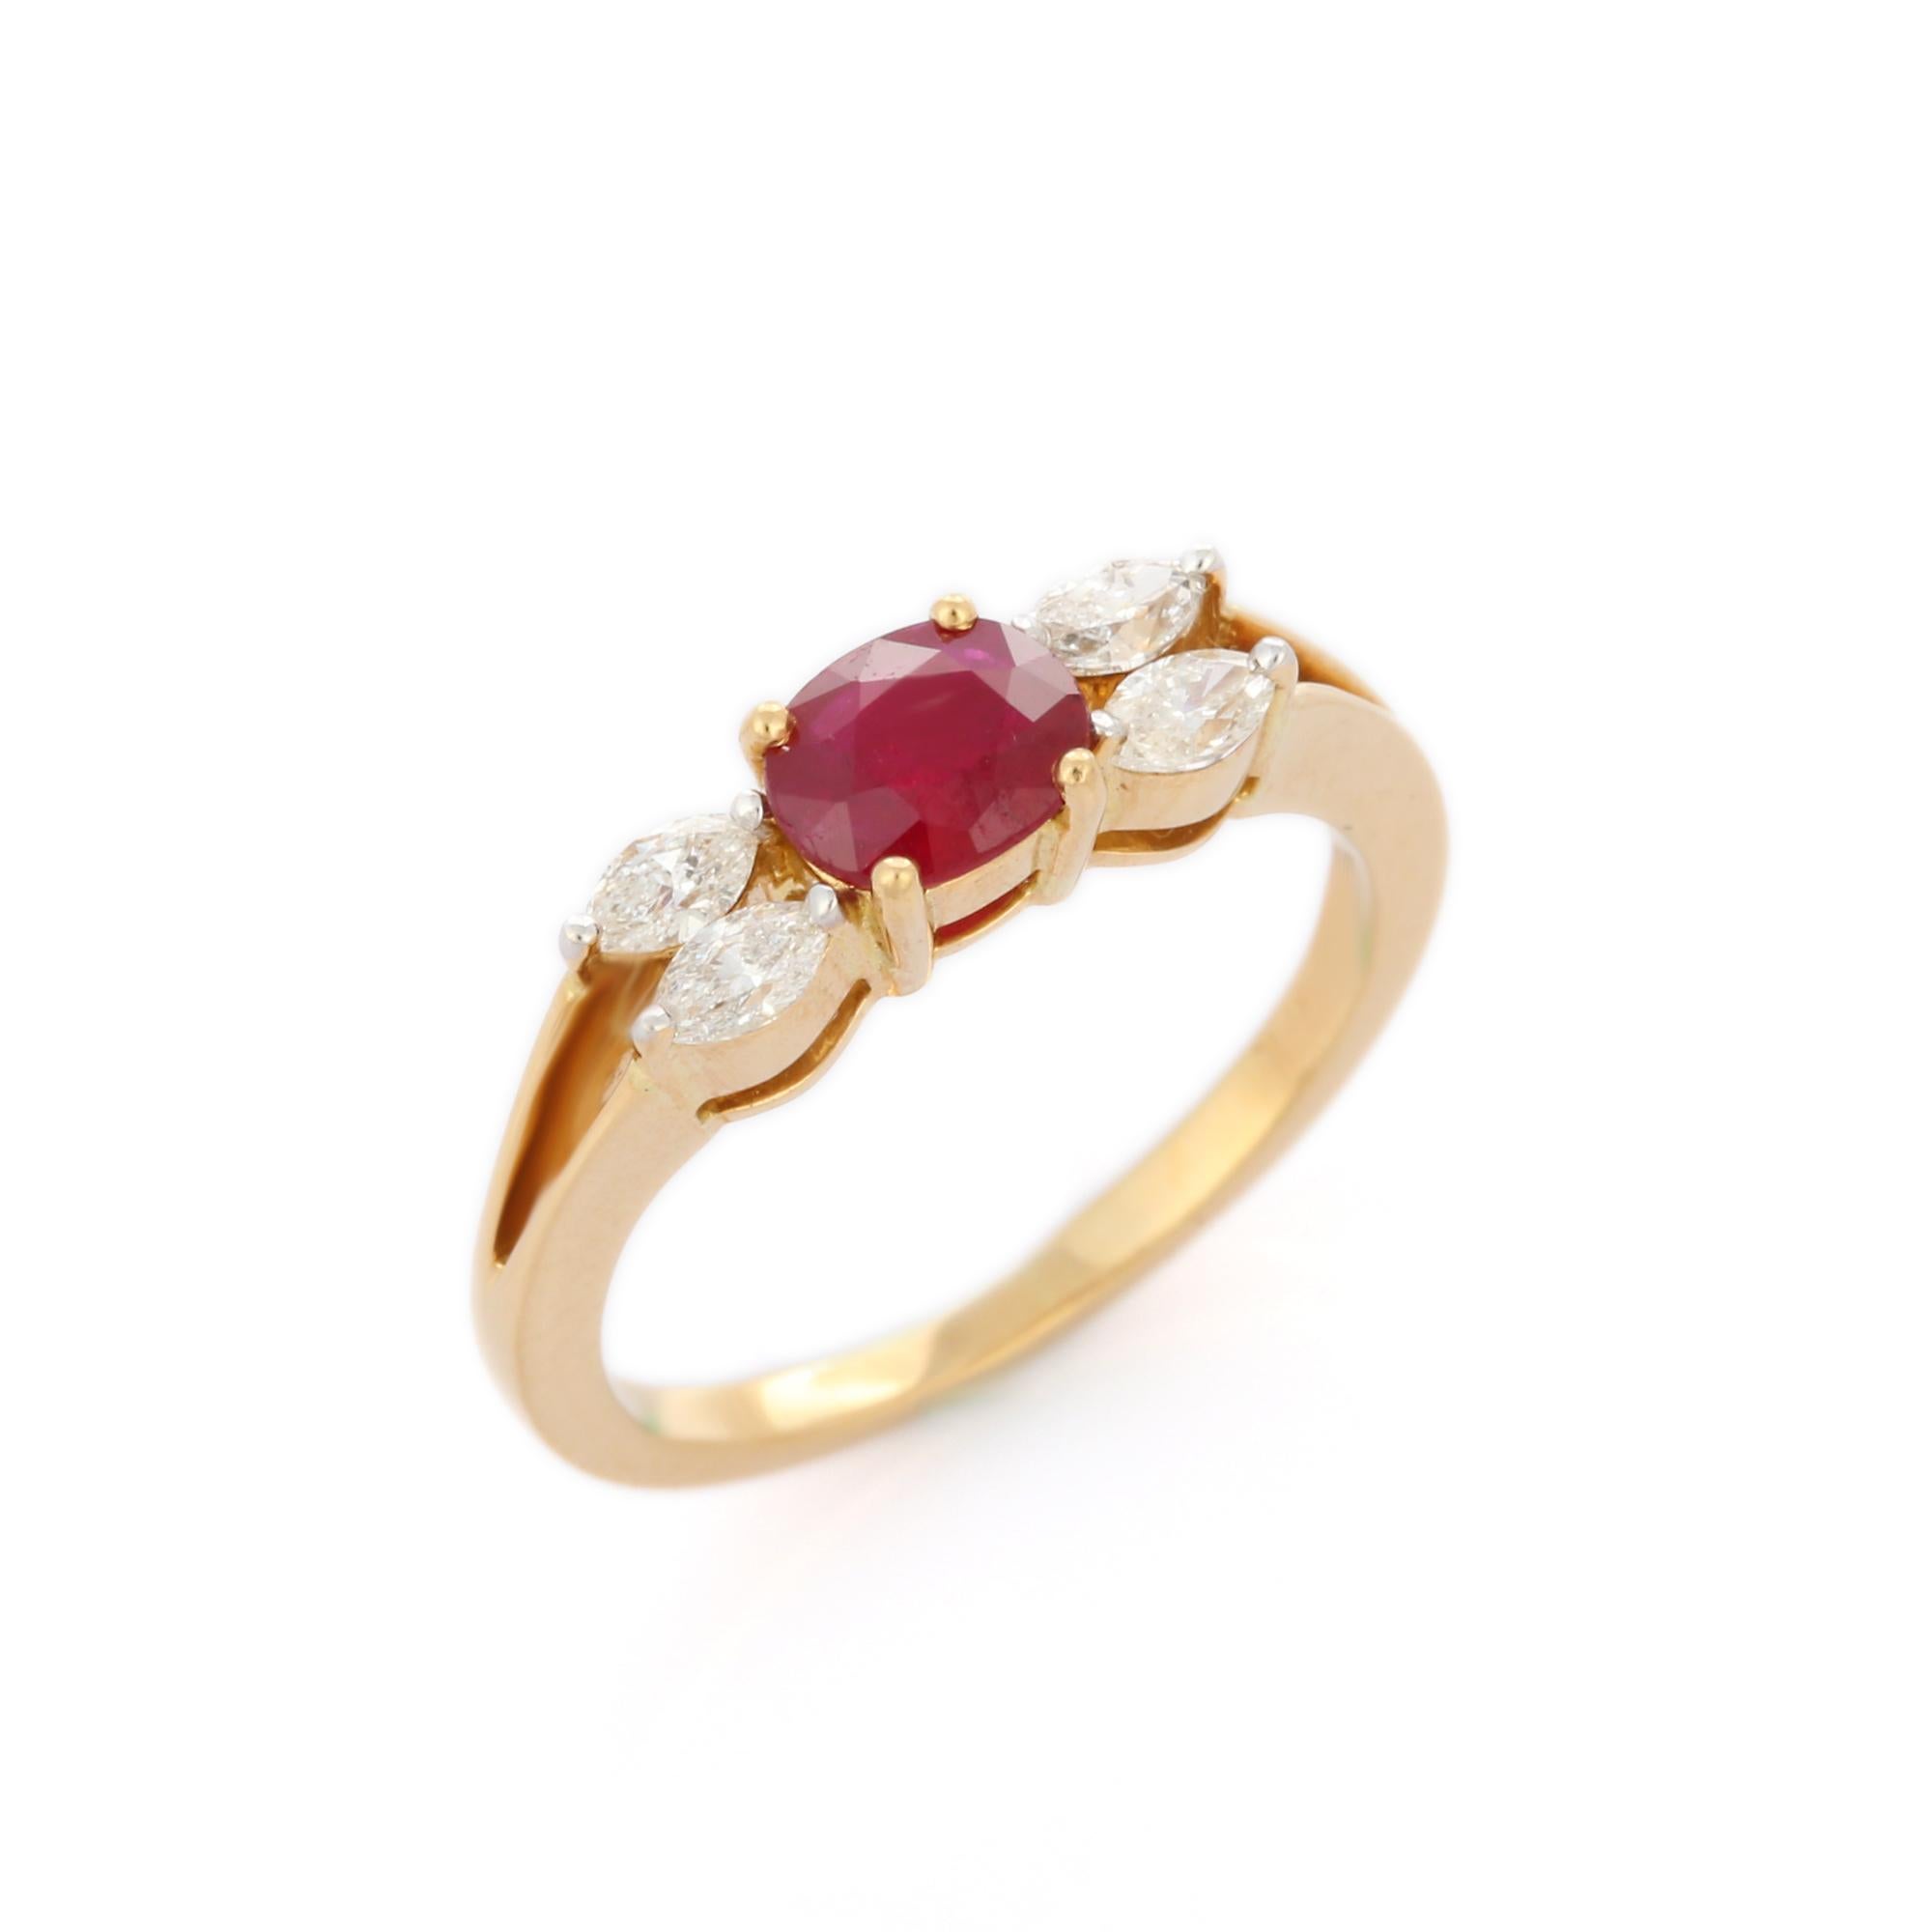 For Sale:  Astonishing Oval Cut Ruby Gemstone and Diamond Ring in 18K Solid Yellow Gold  2